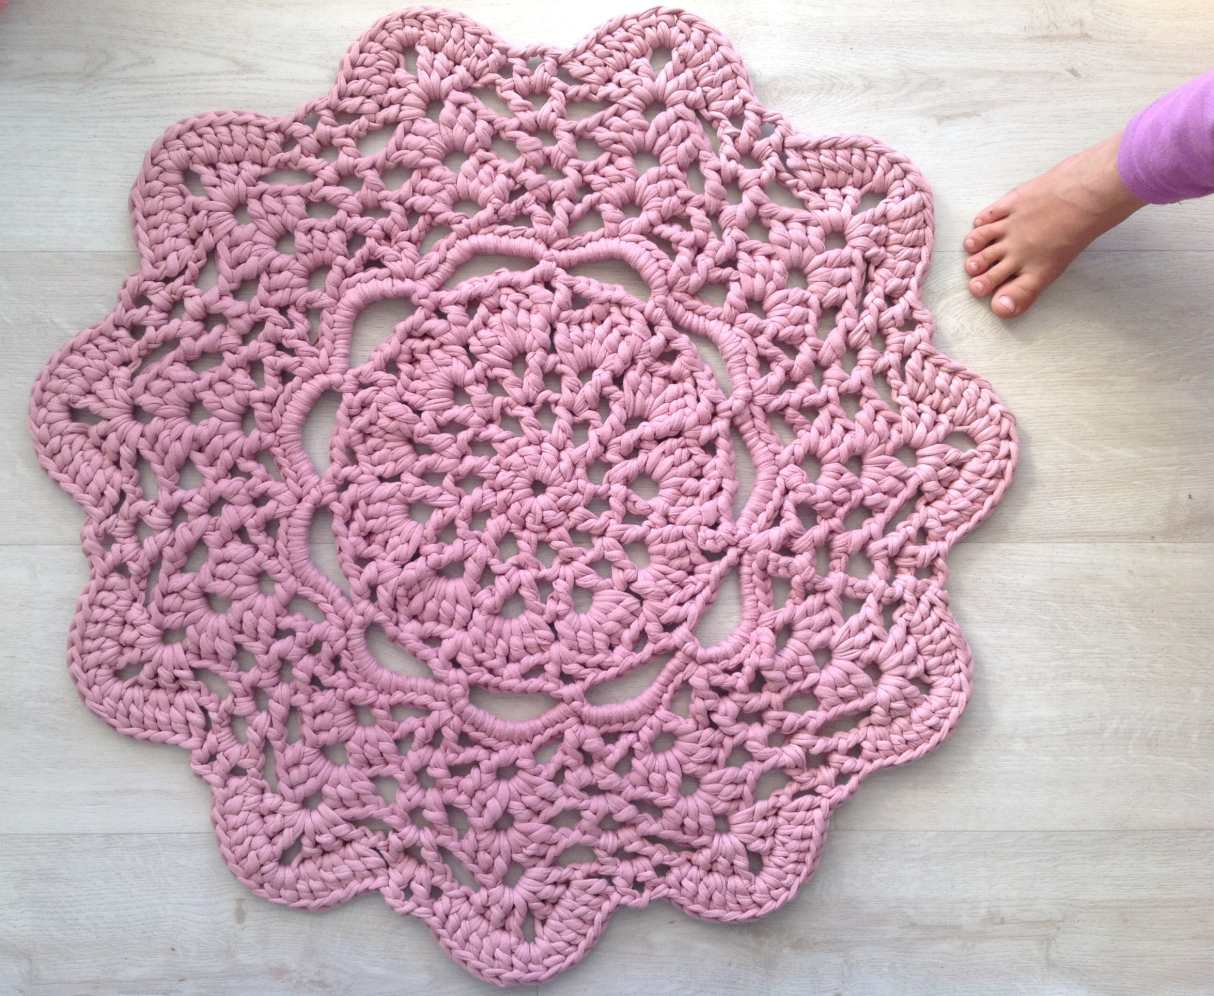 Crochet Centerpiece Pattern 10 Free Thread And Lace Crochet Doily Patterns